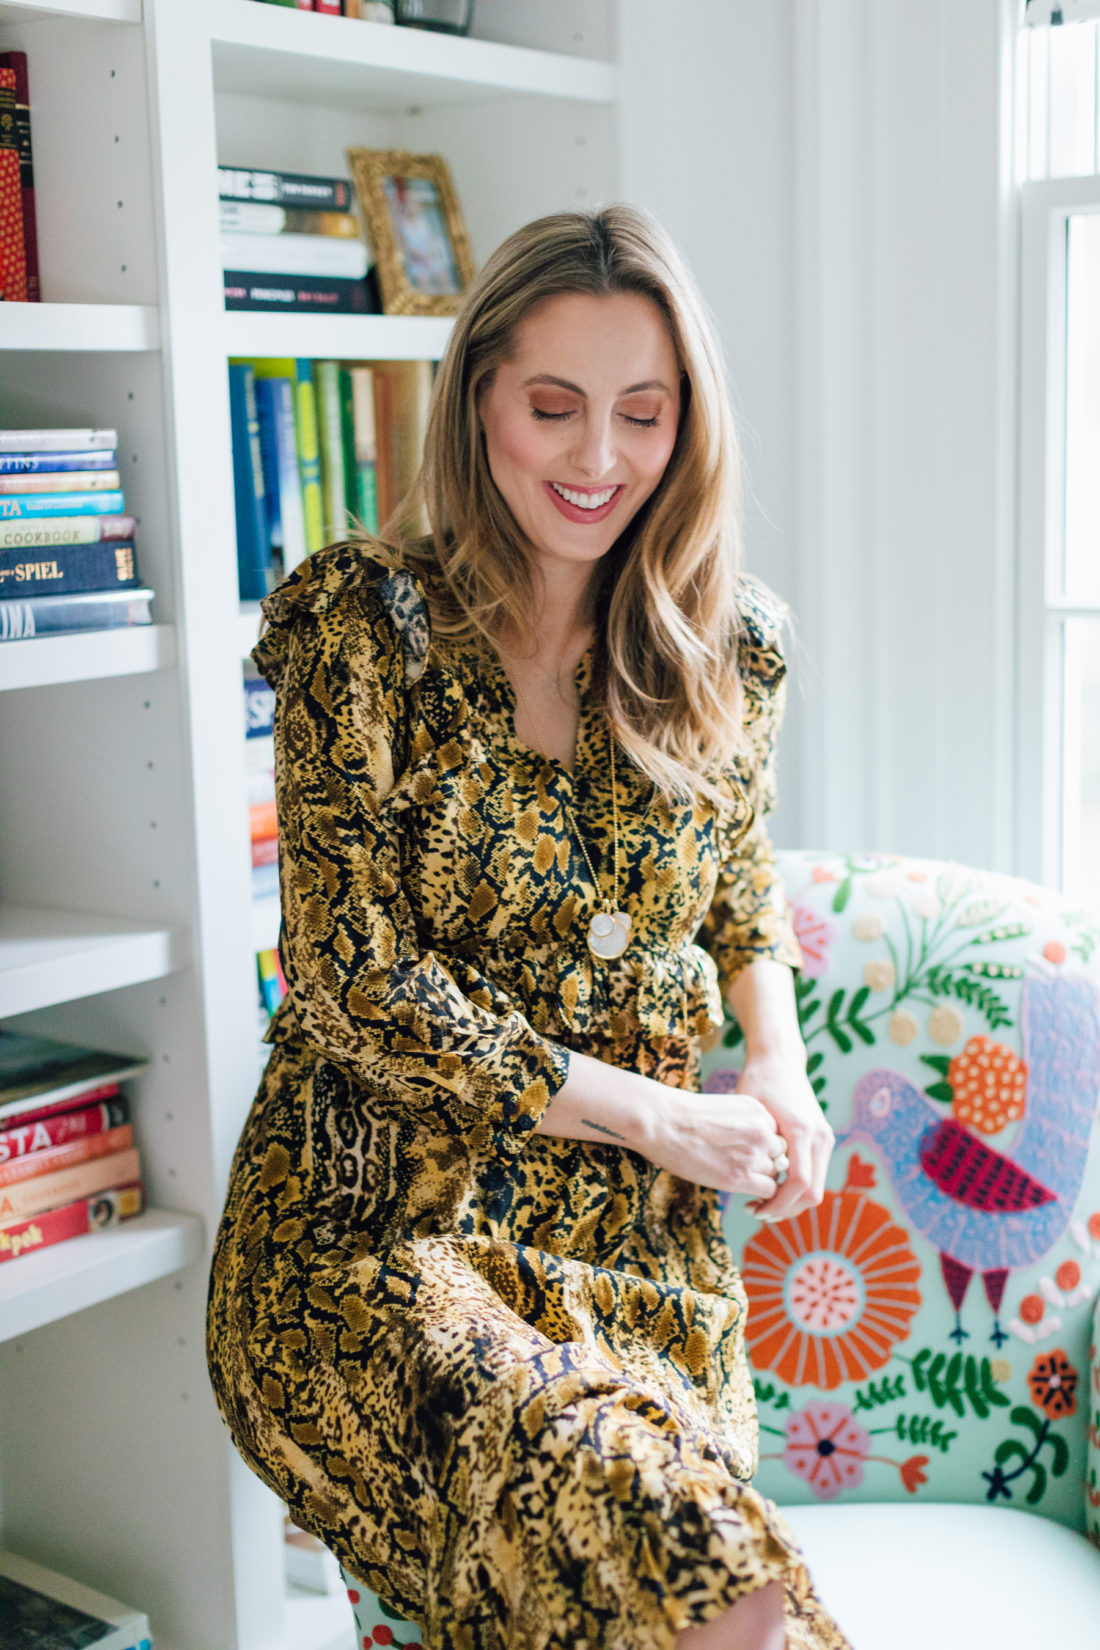 Eva Amurri reflects back on what she's thankful for this year